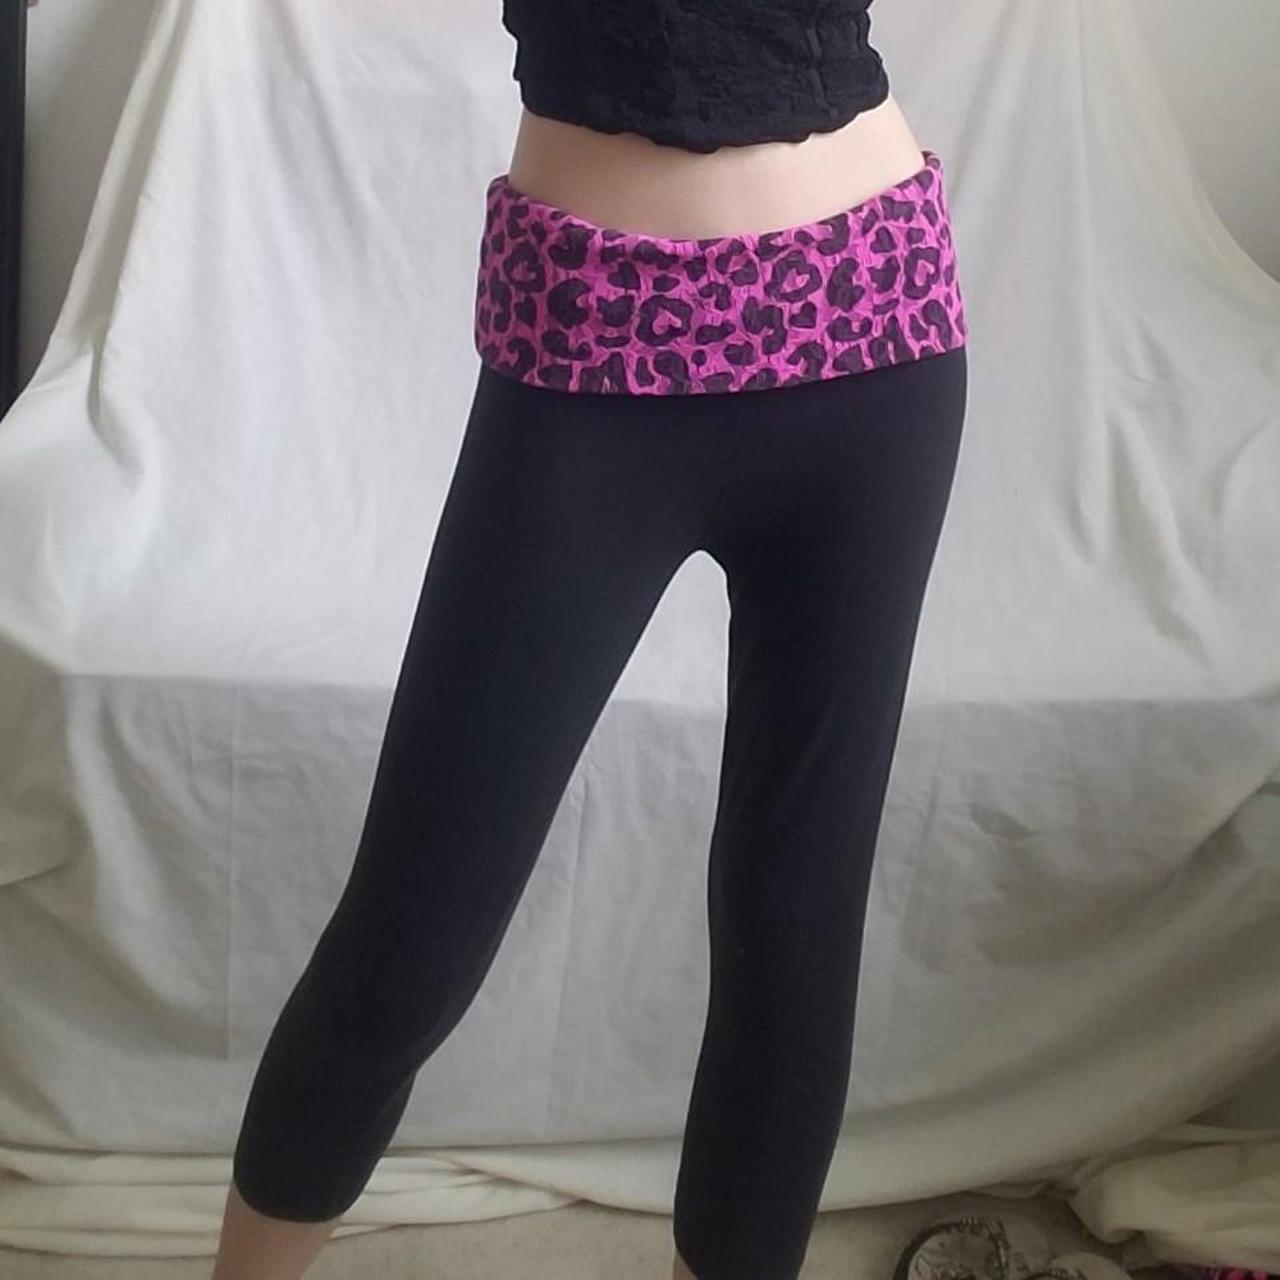 Victoria's Secret Pink And Black Leopard Print Fold Over Leggings Size XS -  $35 - From Bella